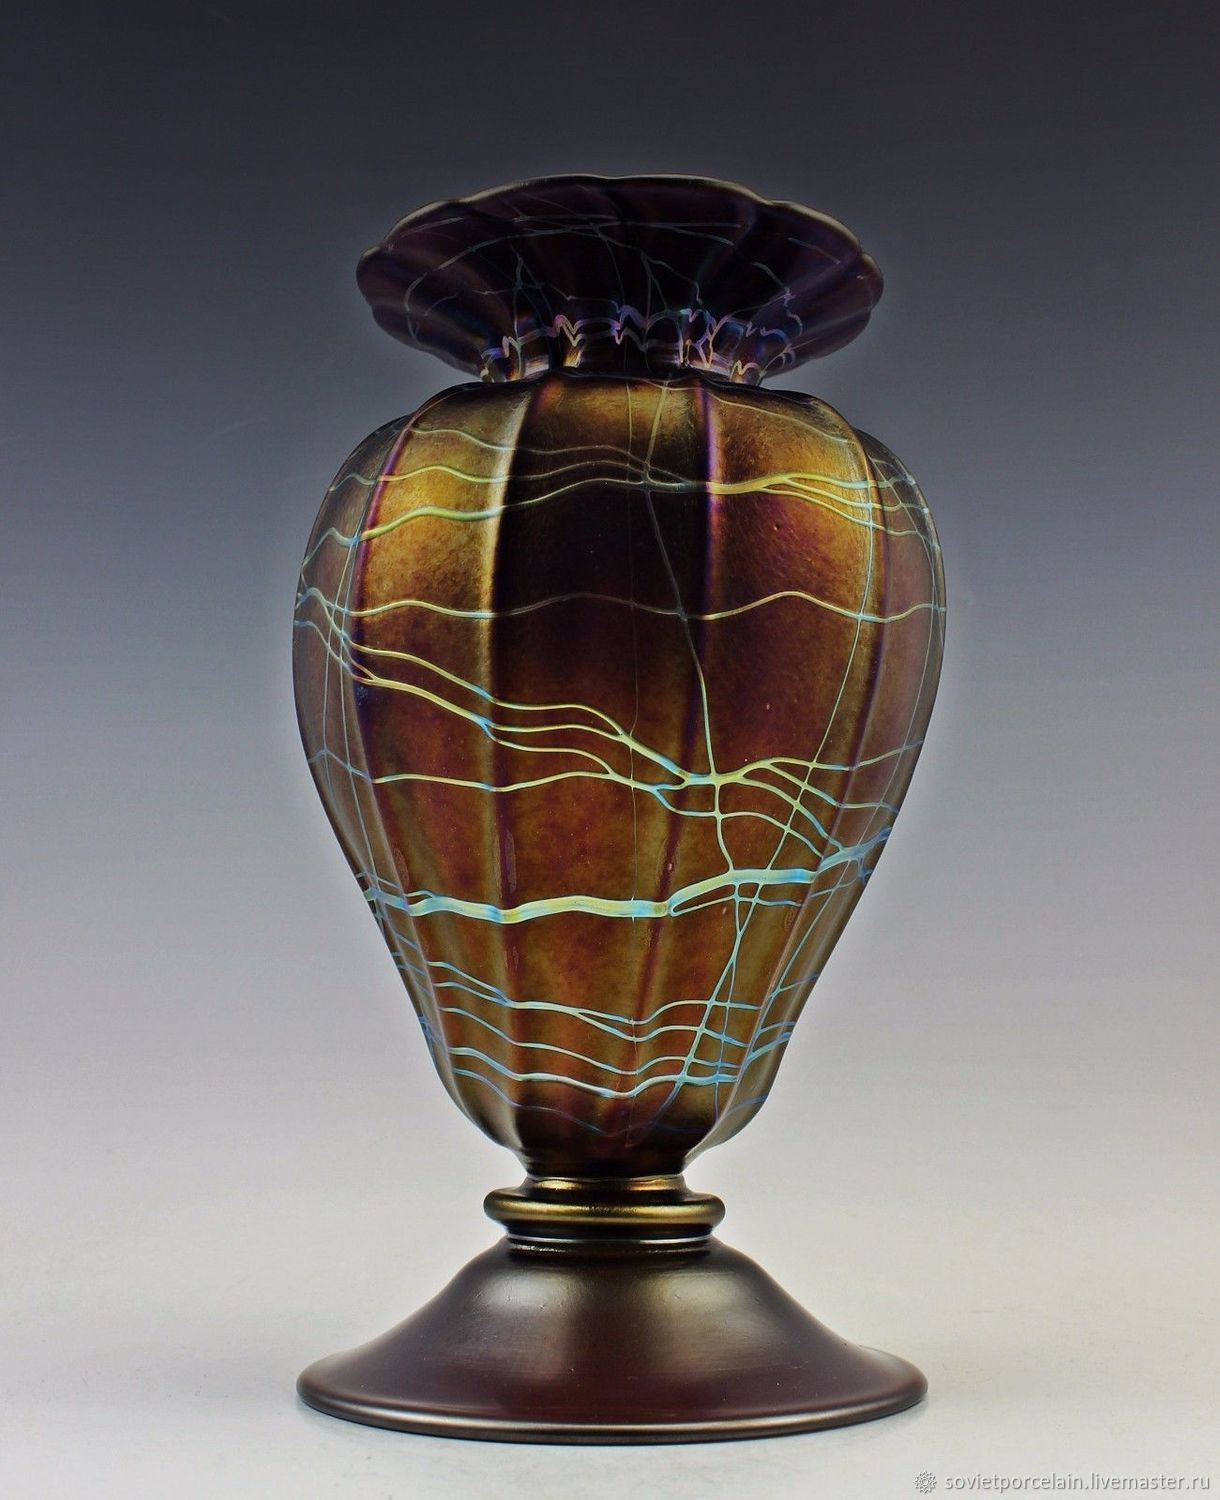 23 attractive Murano Vase Value 2024 free download murano vase value of vintage colored glass vase image vase colored glass iridescence with vintage colored glass vase image vase colored glass iridescence letts art deco shop online on